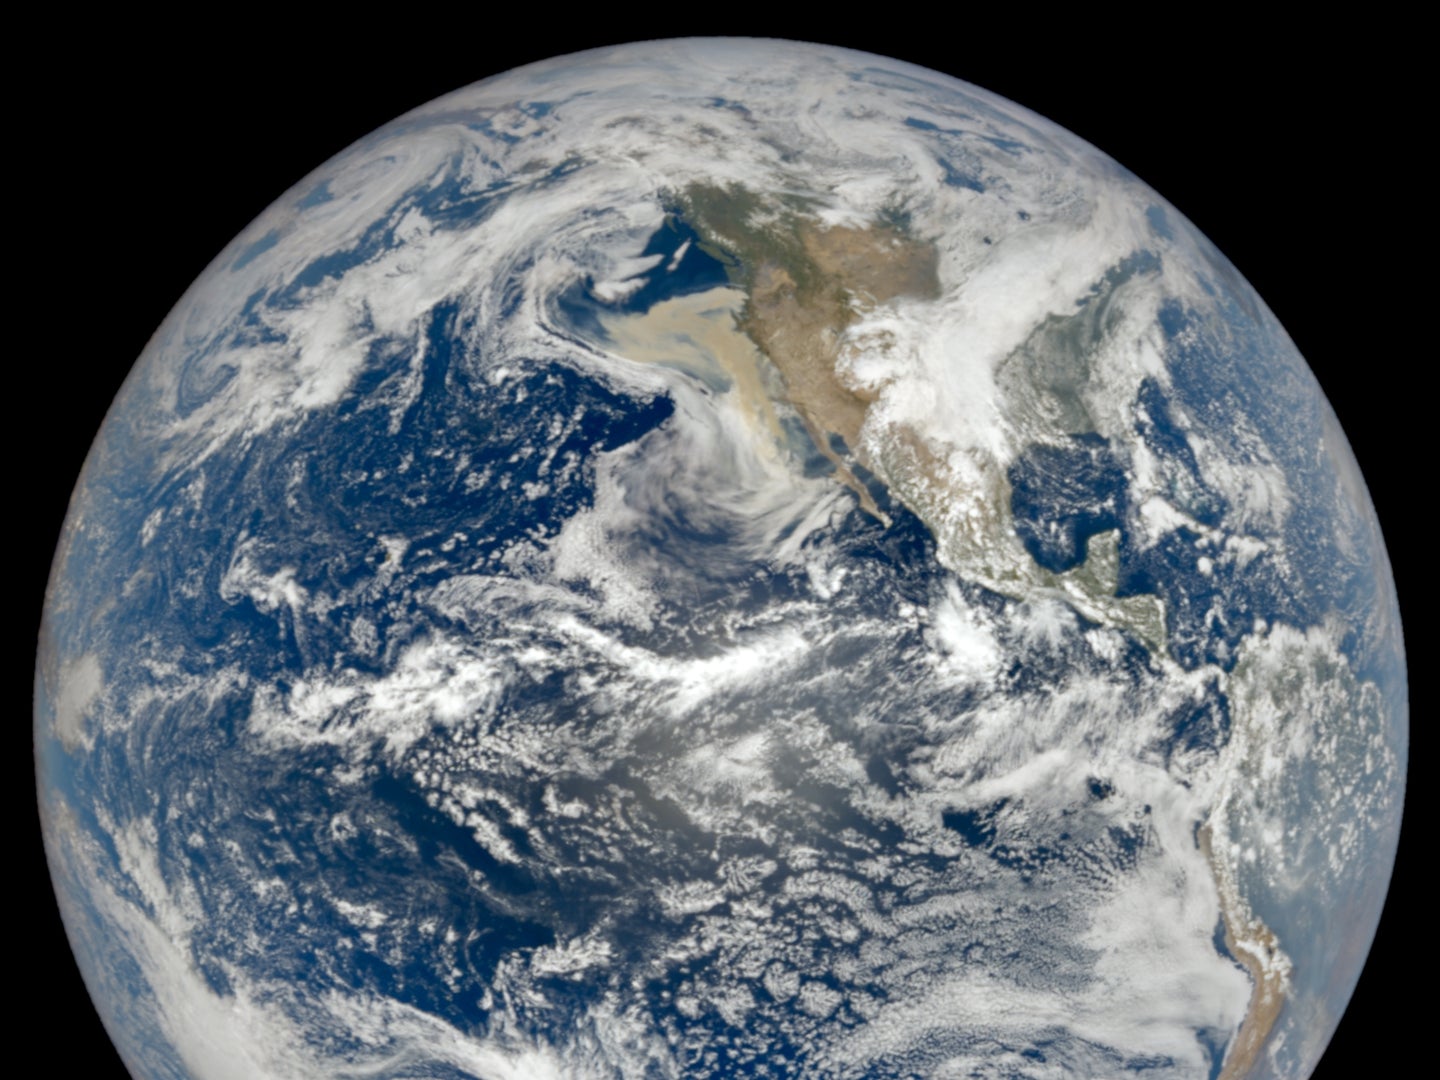 The photo was taken by NASA’s camera EPIC, which takes pictures of the planet every two hour  from NOAA’s satellite DSCOVR. You can spot the plume of wildfire smoke off the west coast of the United States.